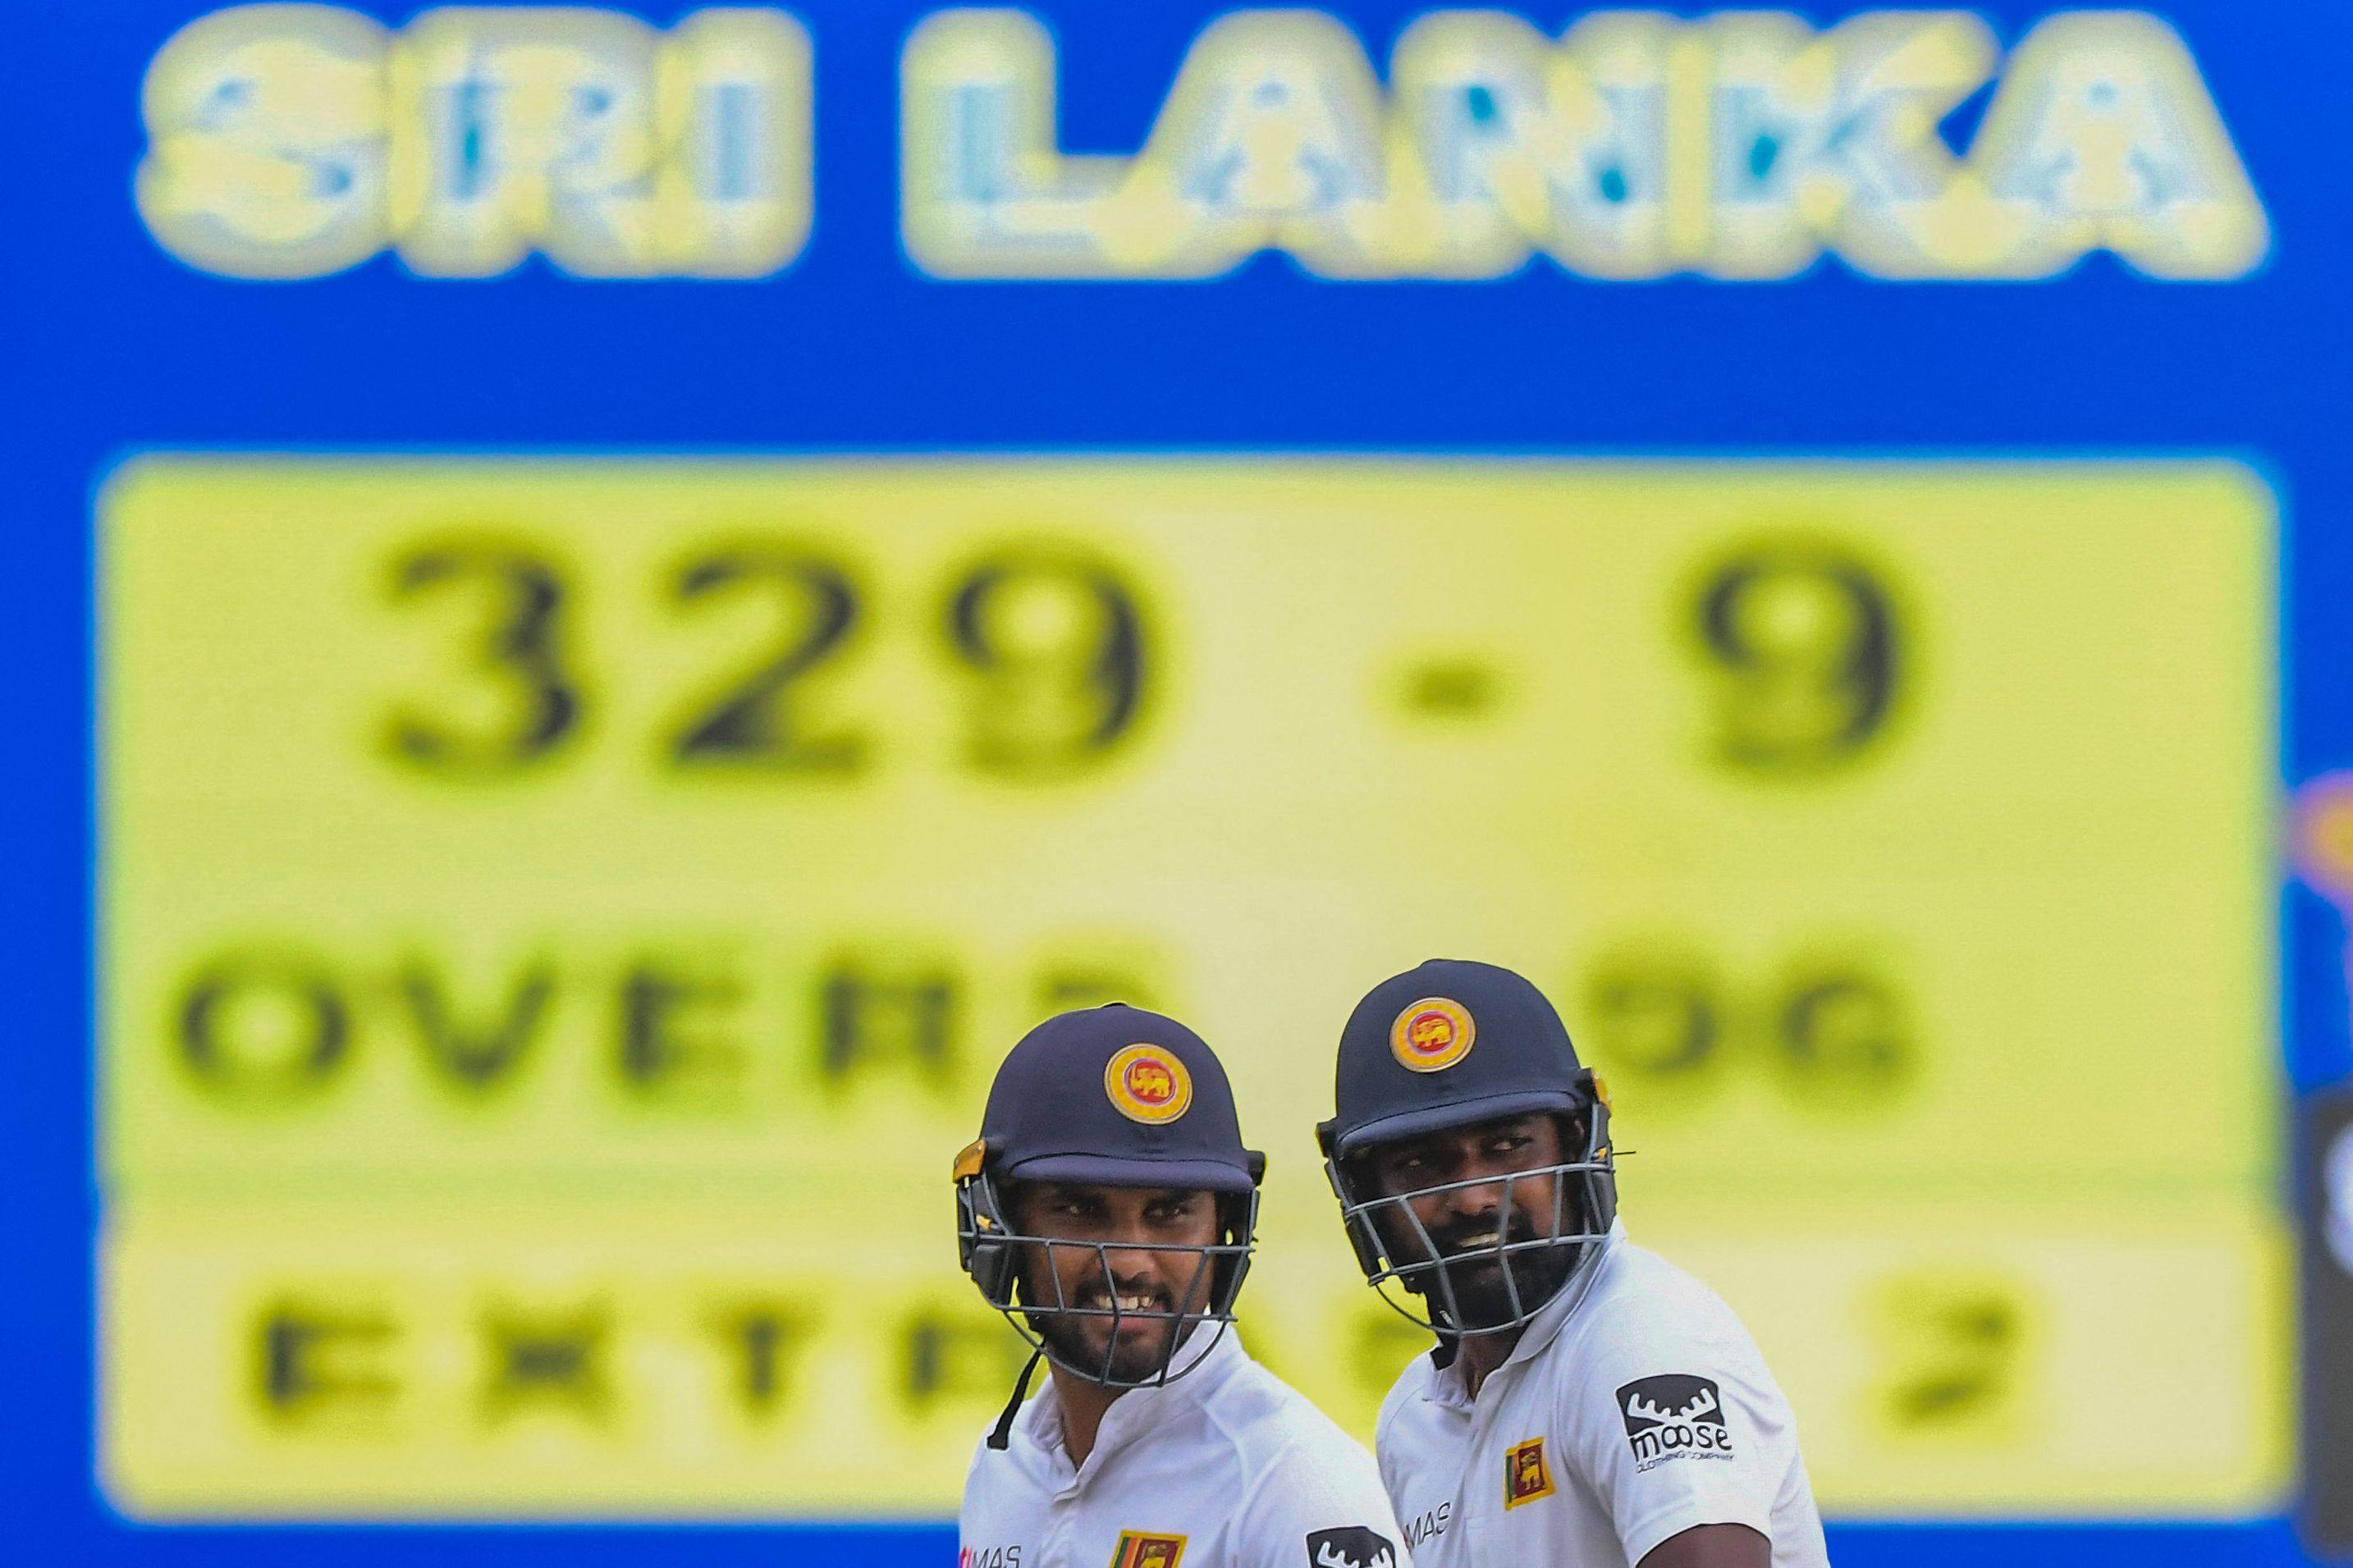 Sri Lanka’s Dinesh Chandimal (left) and and teammate Prabath Jayasuriya walk back to the pavilion at the end of the third day of the first Test against Pakistan in Galle. Photo: AFP